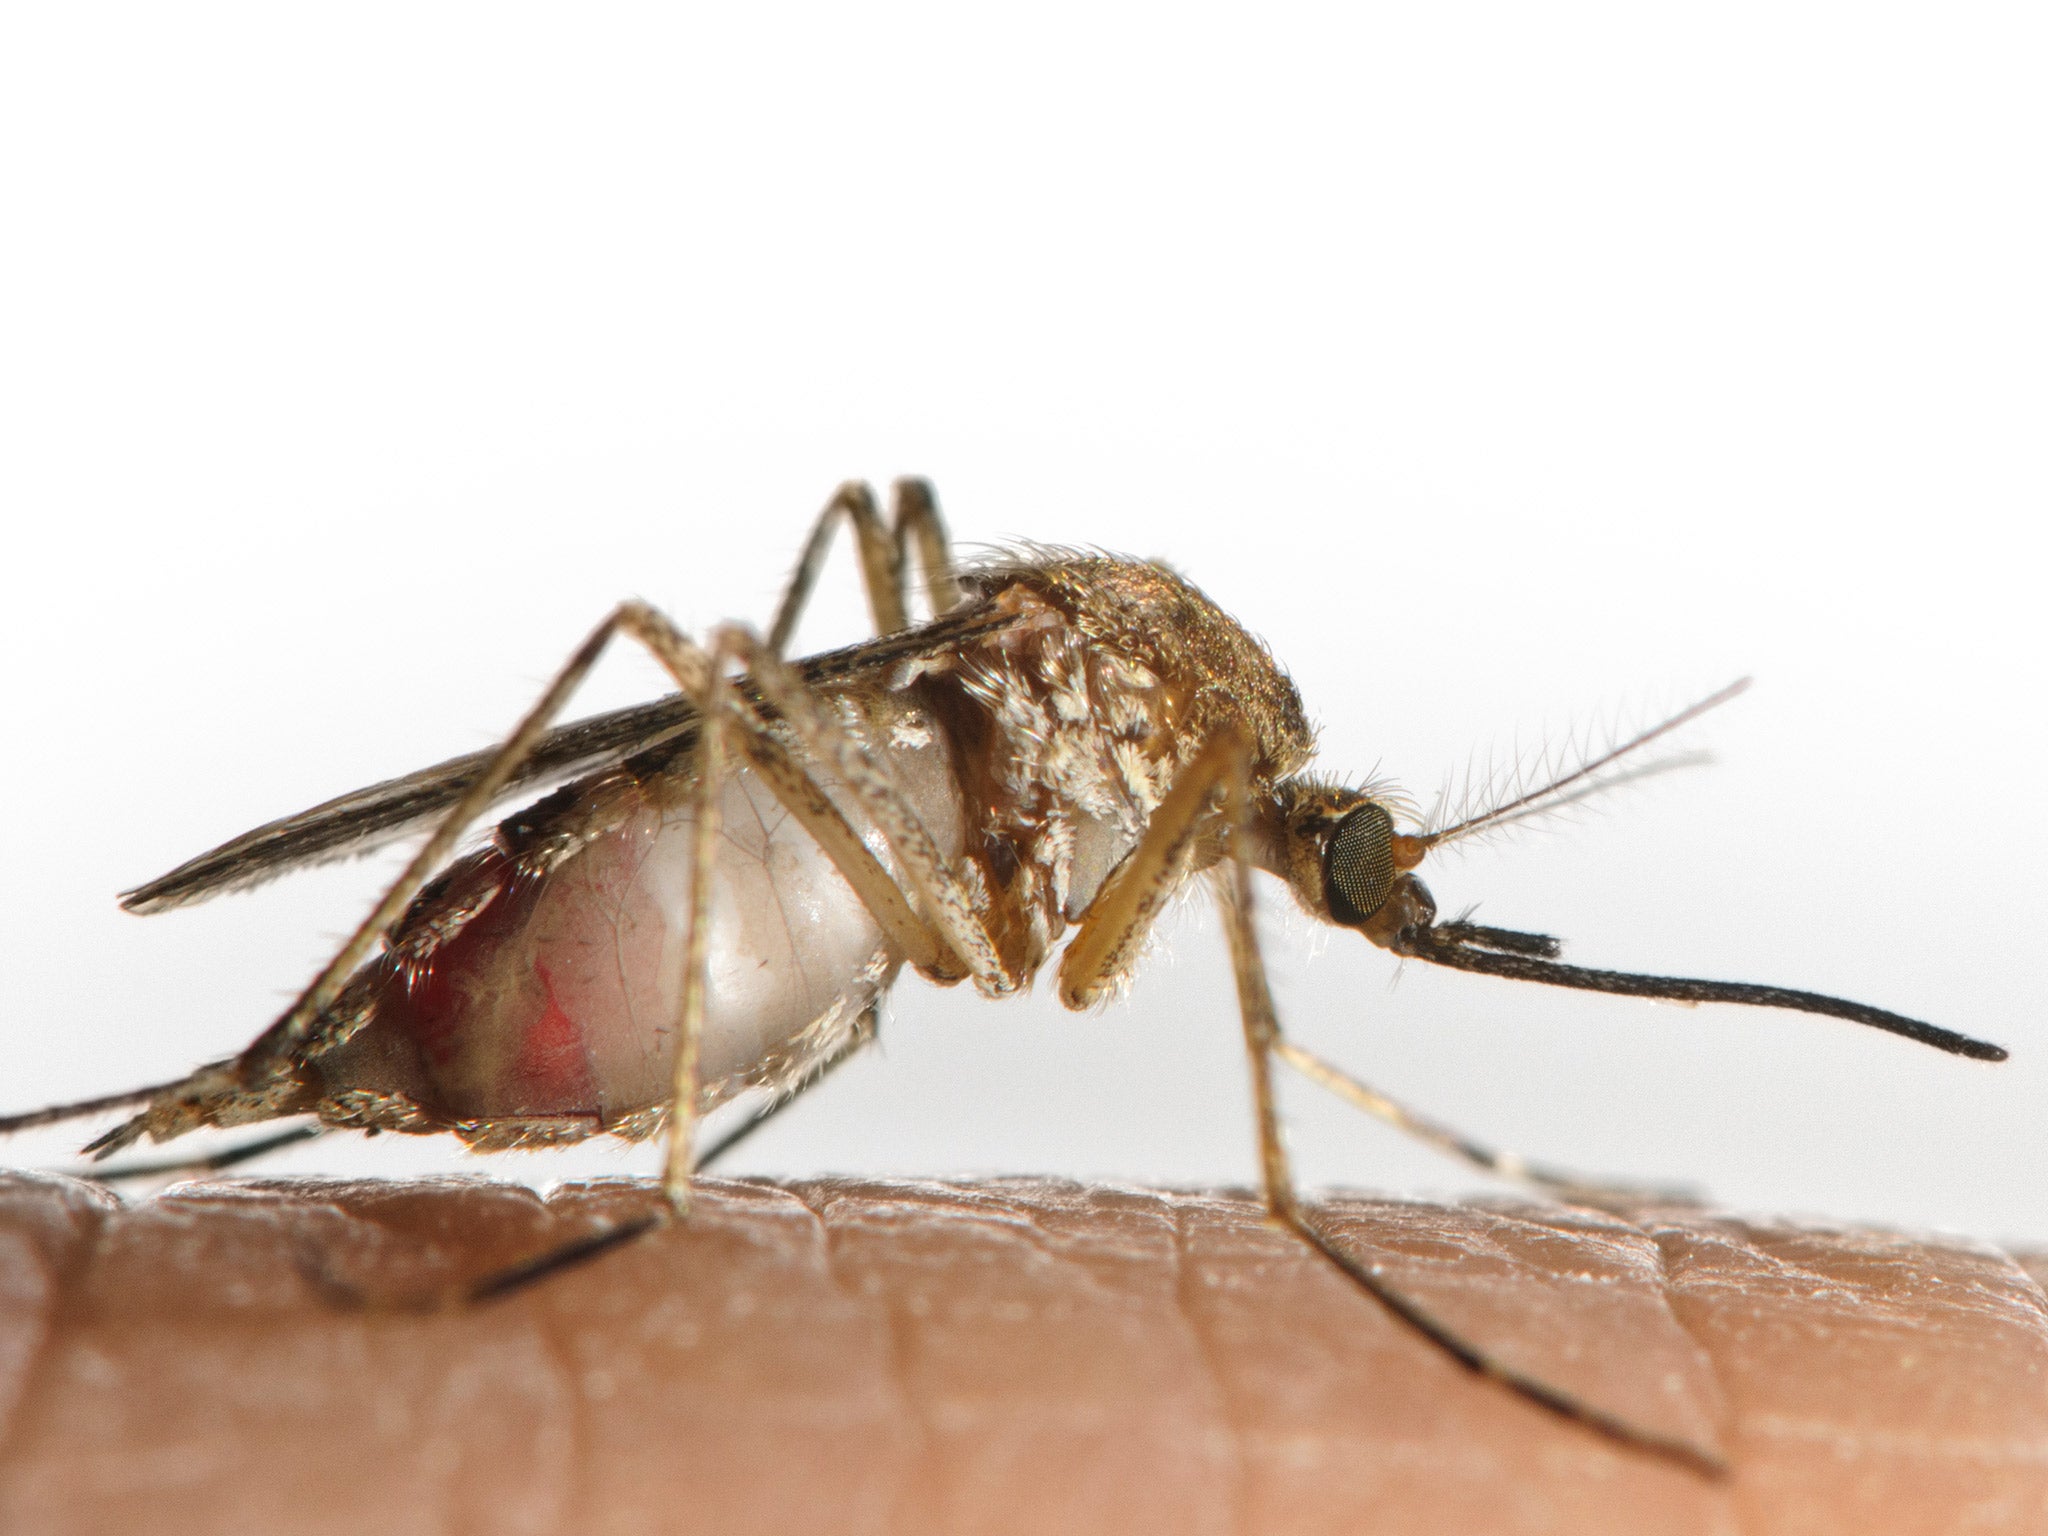 Mosquitoes prefer to bite some people more than others